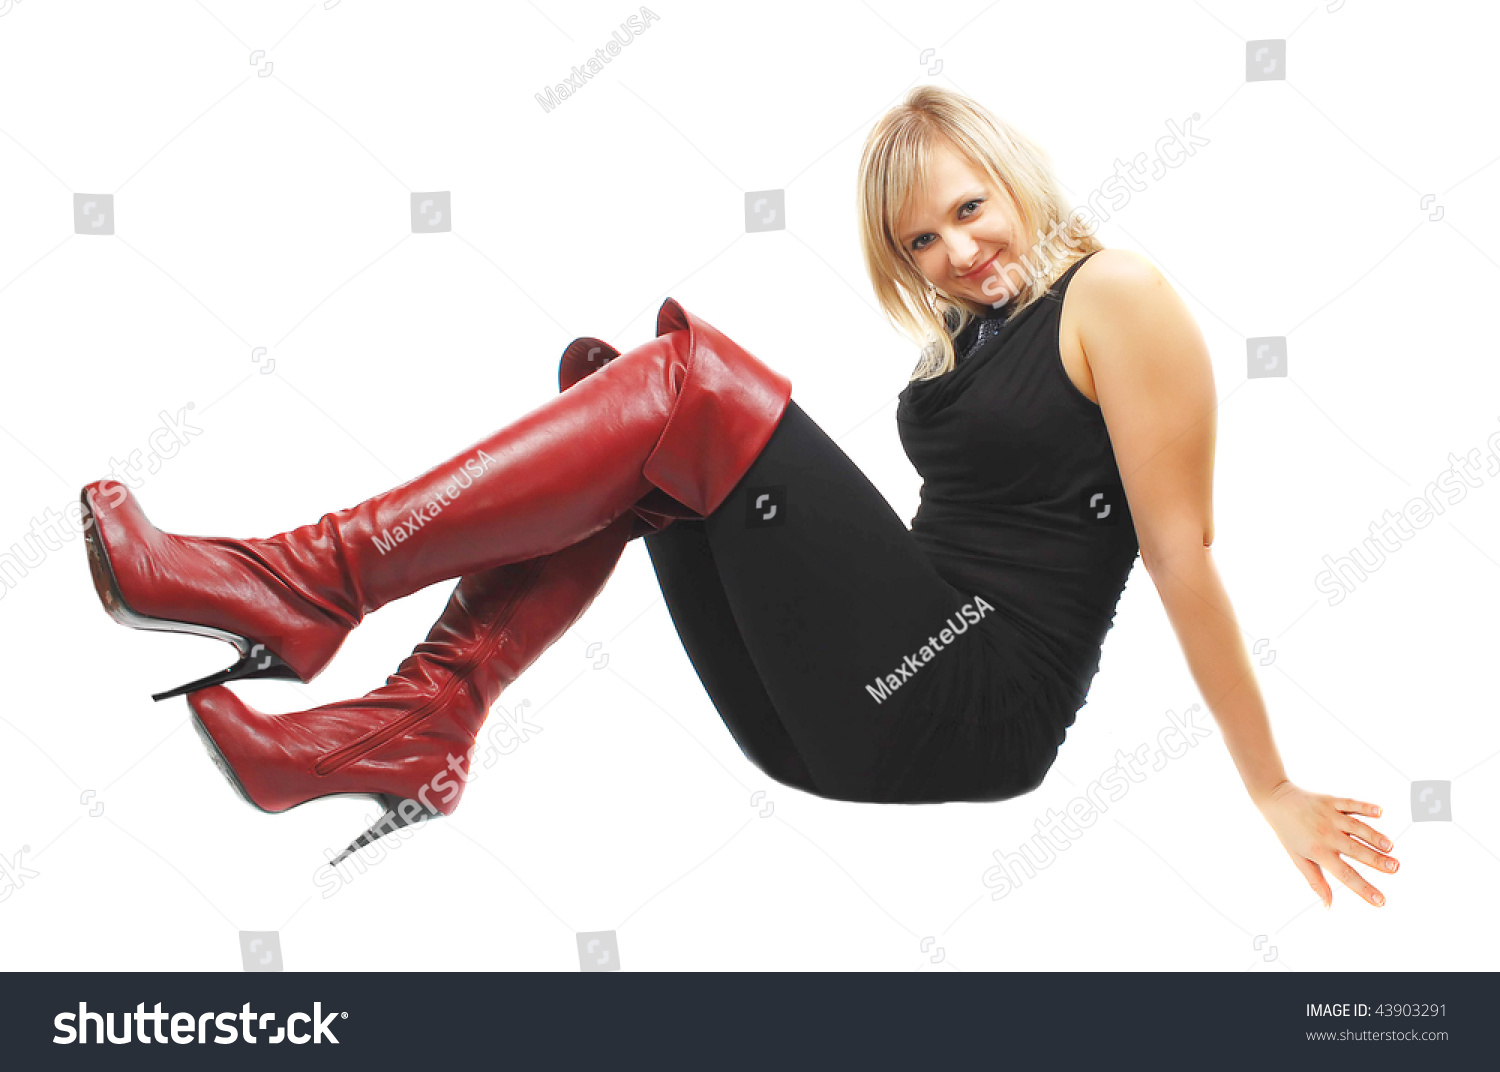 Red boots ans black latex